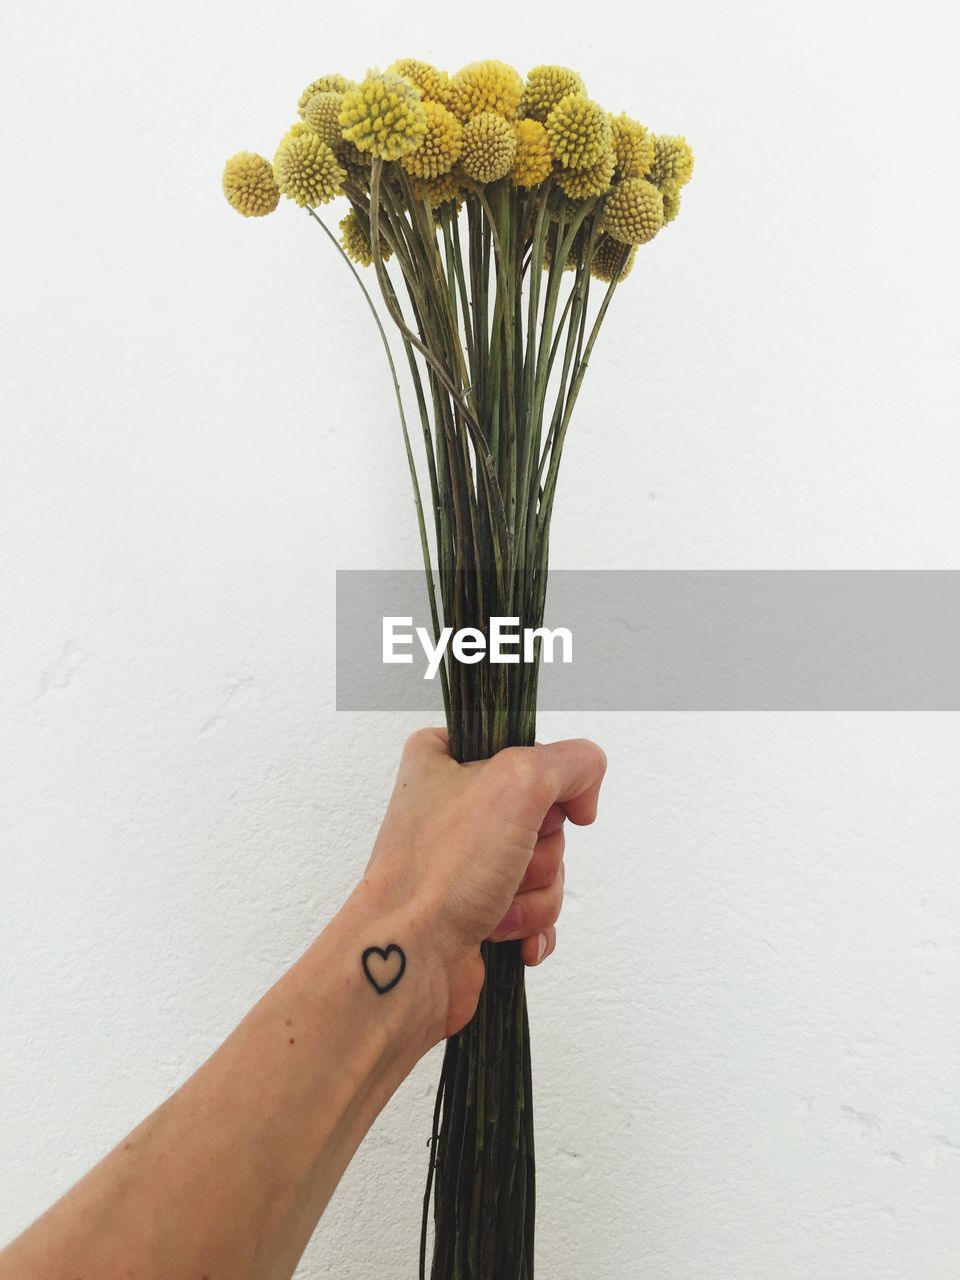 Cropped hand with heart shape tattoo holding yellow flowers against white background